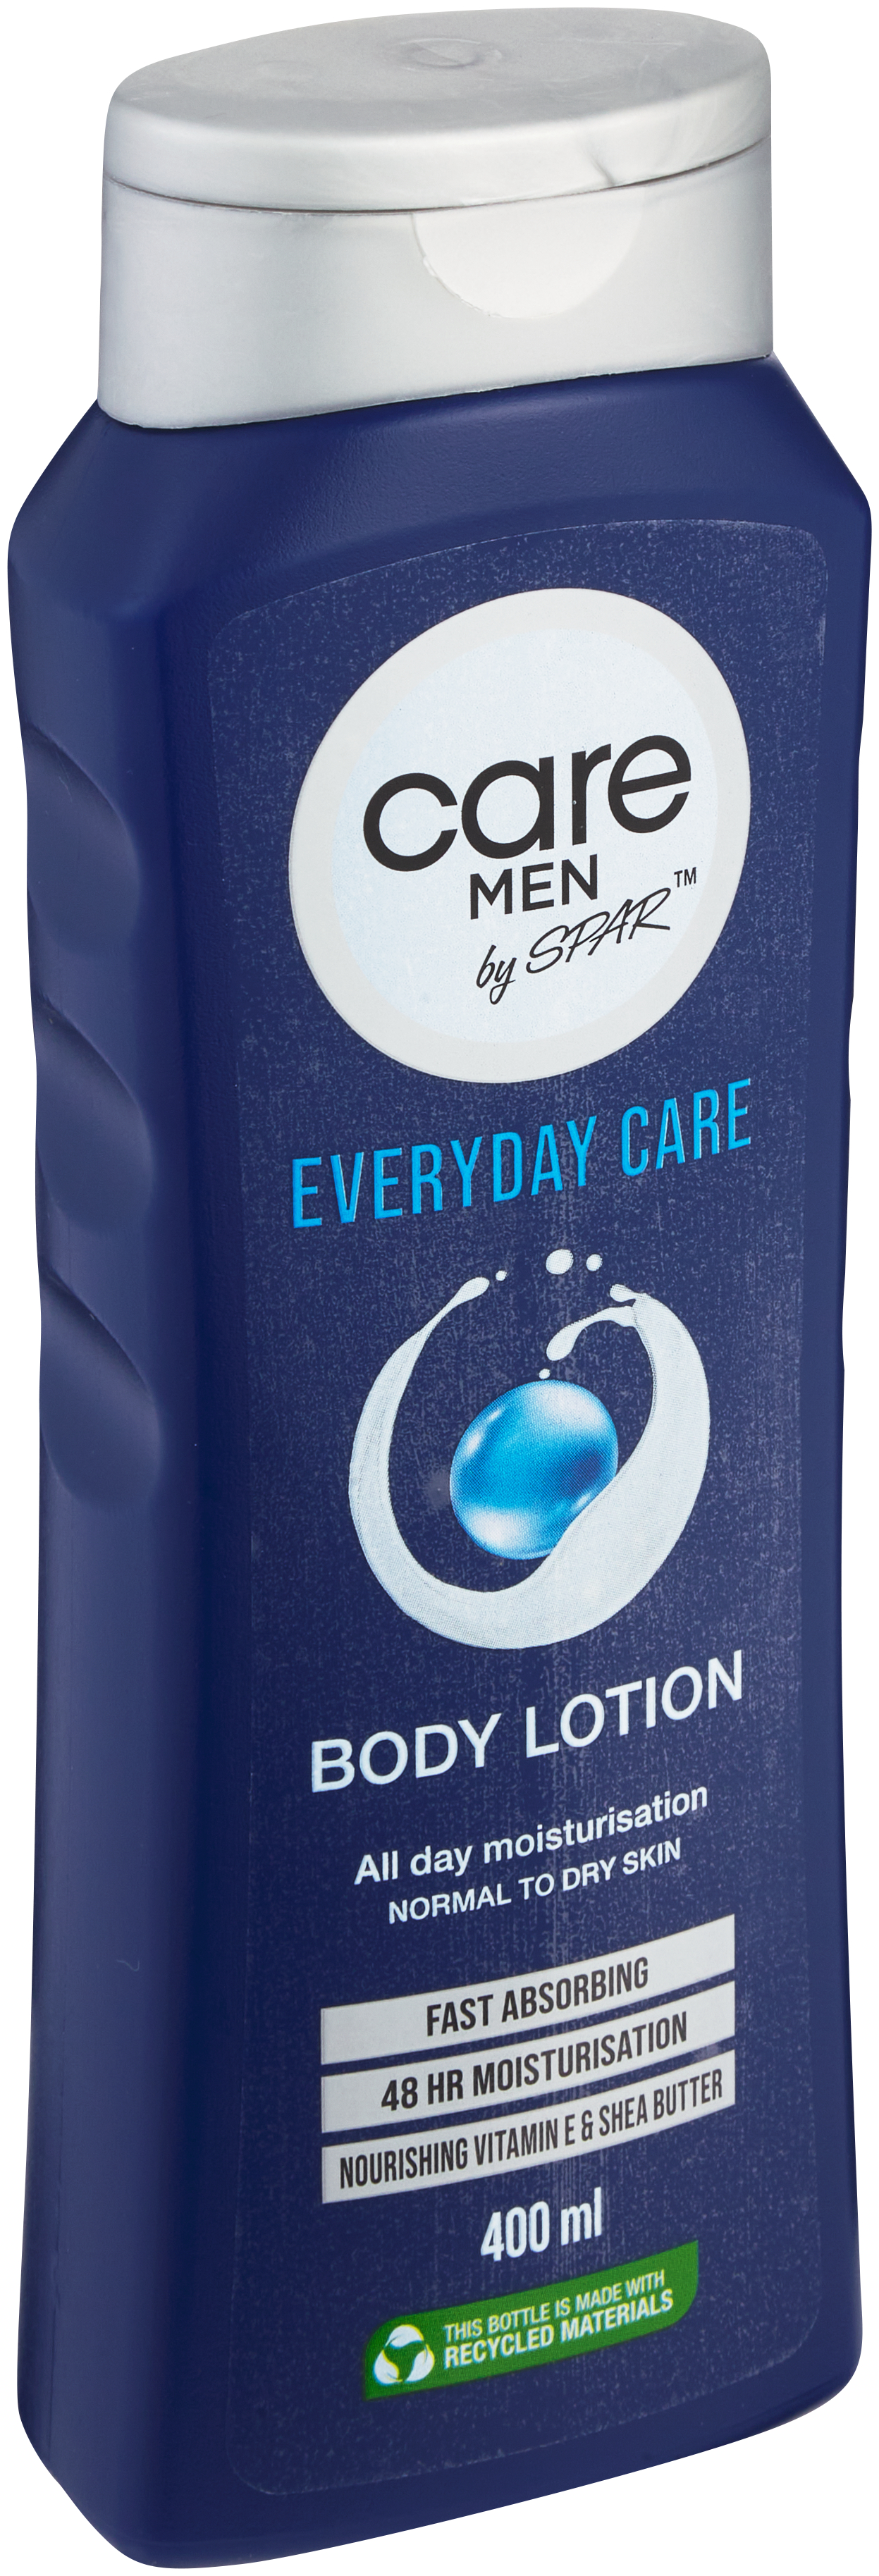 care by spar men lotion everyday care